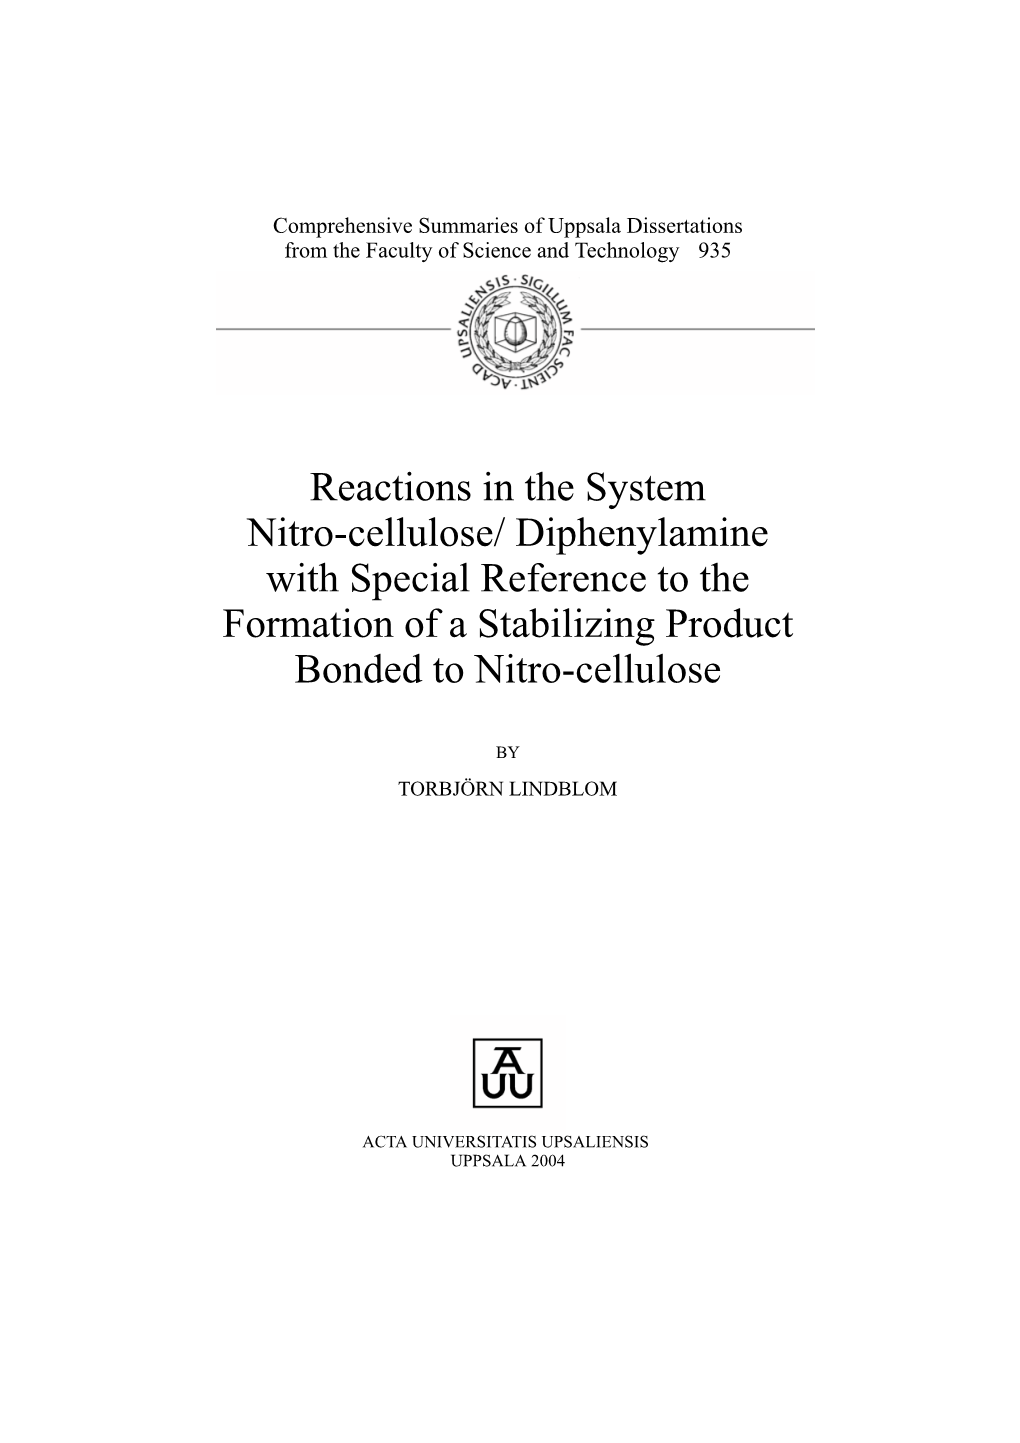 Reactions in the System Nitro-Cellulose/ Diphenylamine with Special Reference to the Formation of a Stabilizing Product Bonded to Nitro-Cellulose